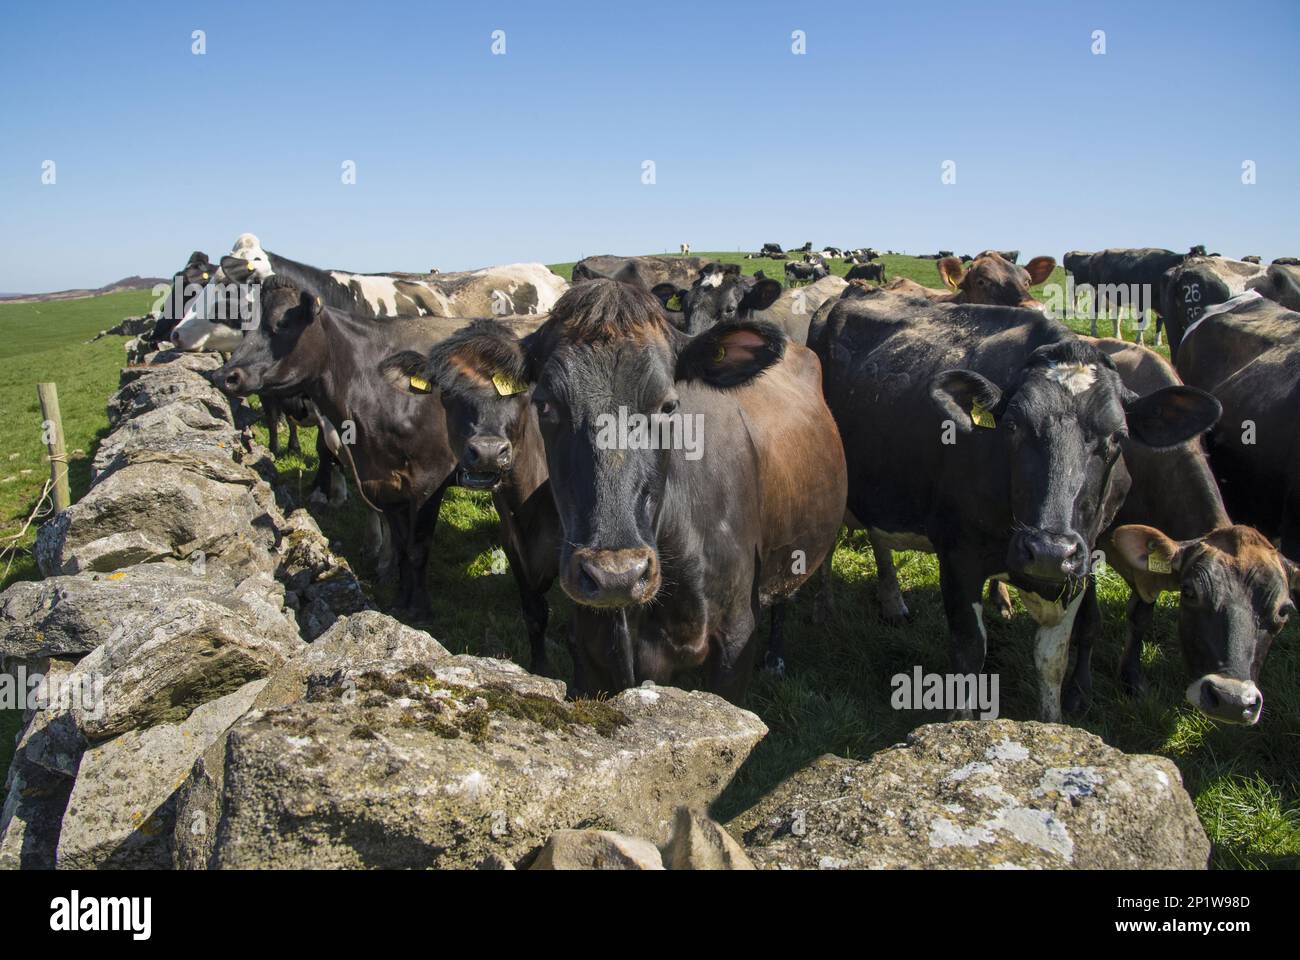 Domestic cattle, dairy cows, herd looking over dry stone wall, Clitheroe, Lancashire, England, United Kingdom Stock Photo